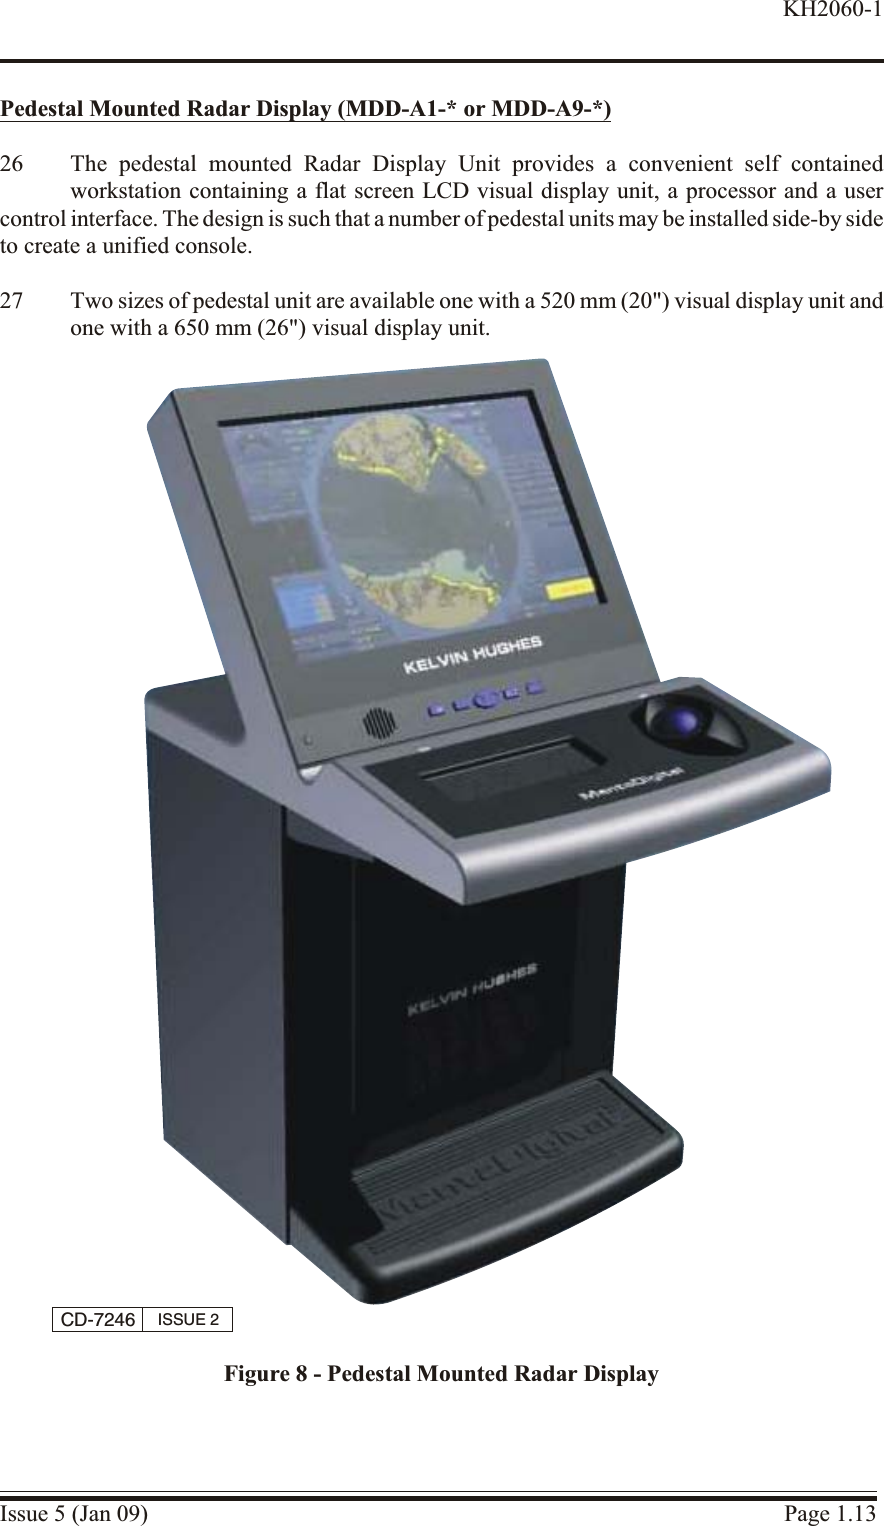 Pedestal Mounted Ra dar Dis play (MDD-A1-* or MDD-A9-*)26 The pedestal mounted Radar Display Unit provides a convenient self containedworkstation containing a flat screen LCD visual display unit, a processor and a usercontrol interface. The design is such that a number of pedestal units may be installed side-by sideto create a unified console.27 Two sizes of pedestal unit are available one with a 520 mm (20&quot;) visual display unit andone with a 650 mm (26&quot;) visual display unit.Issue 5 (Jan 09) Page 1.13KH2060-1CD-7246 ISSUE 2Figure 8 - Pedestal Mounted Radar Display